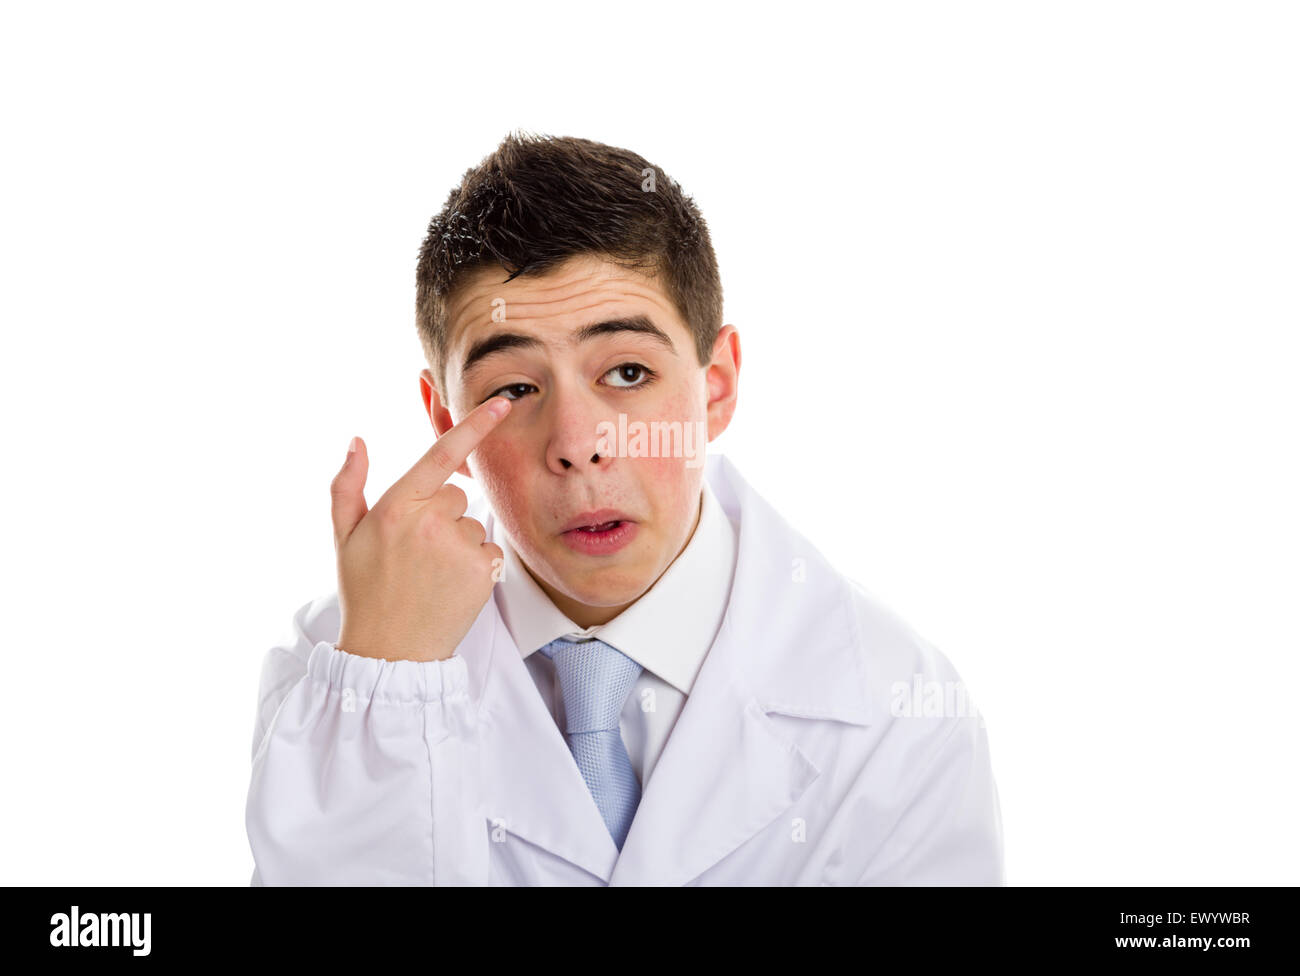 A boy doctor in white coat and blue tie helps to feel medicine more friendly: he is touching his eye with finger. His acne skin has not ben retouched Stock Photo